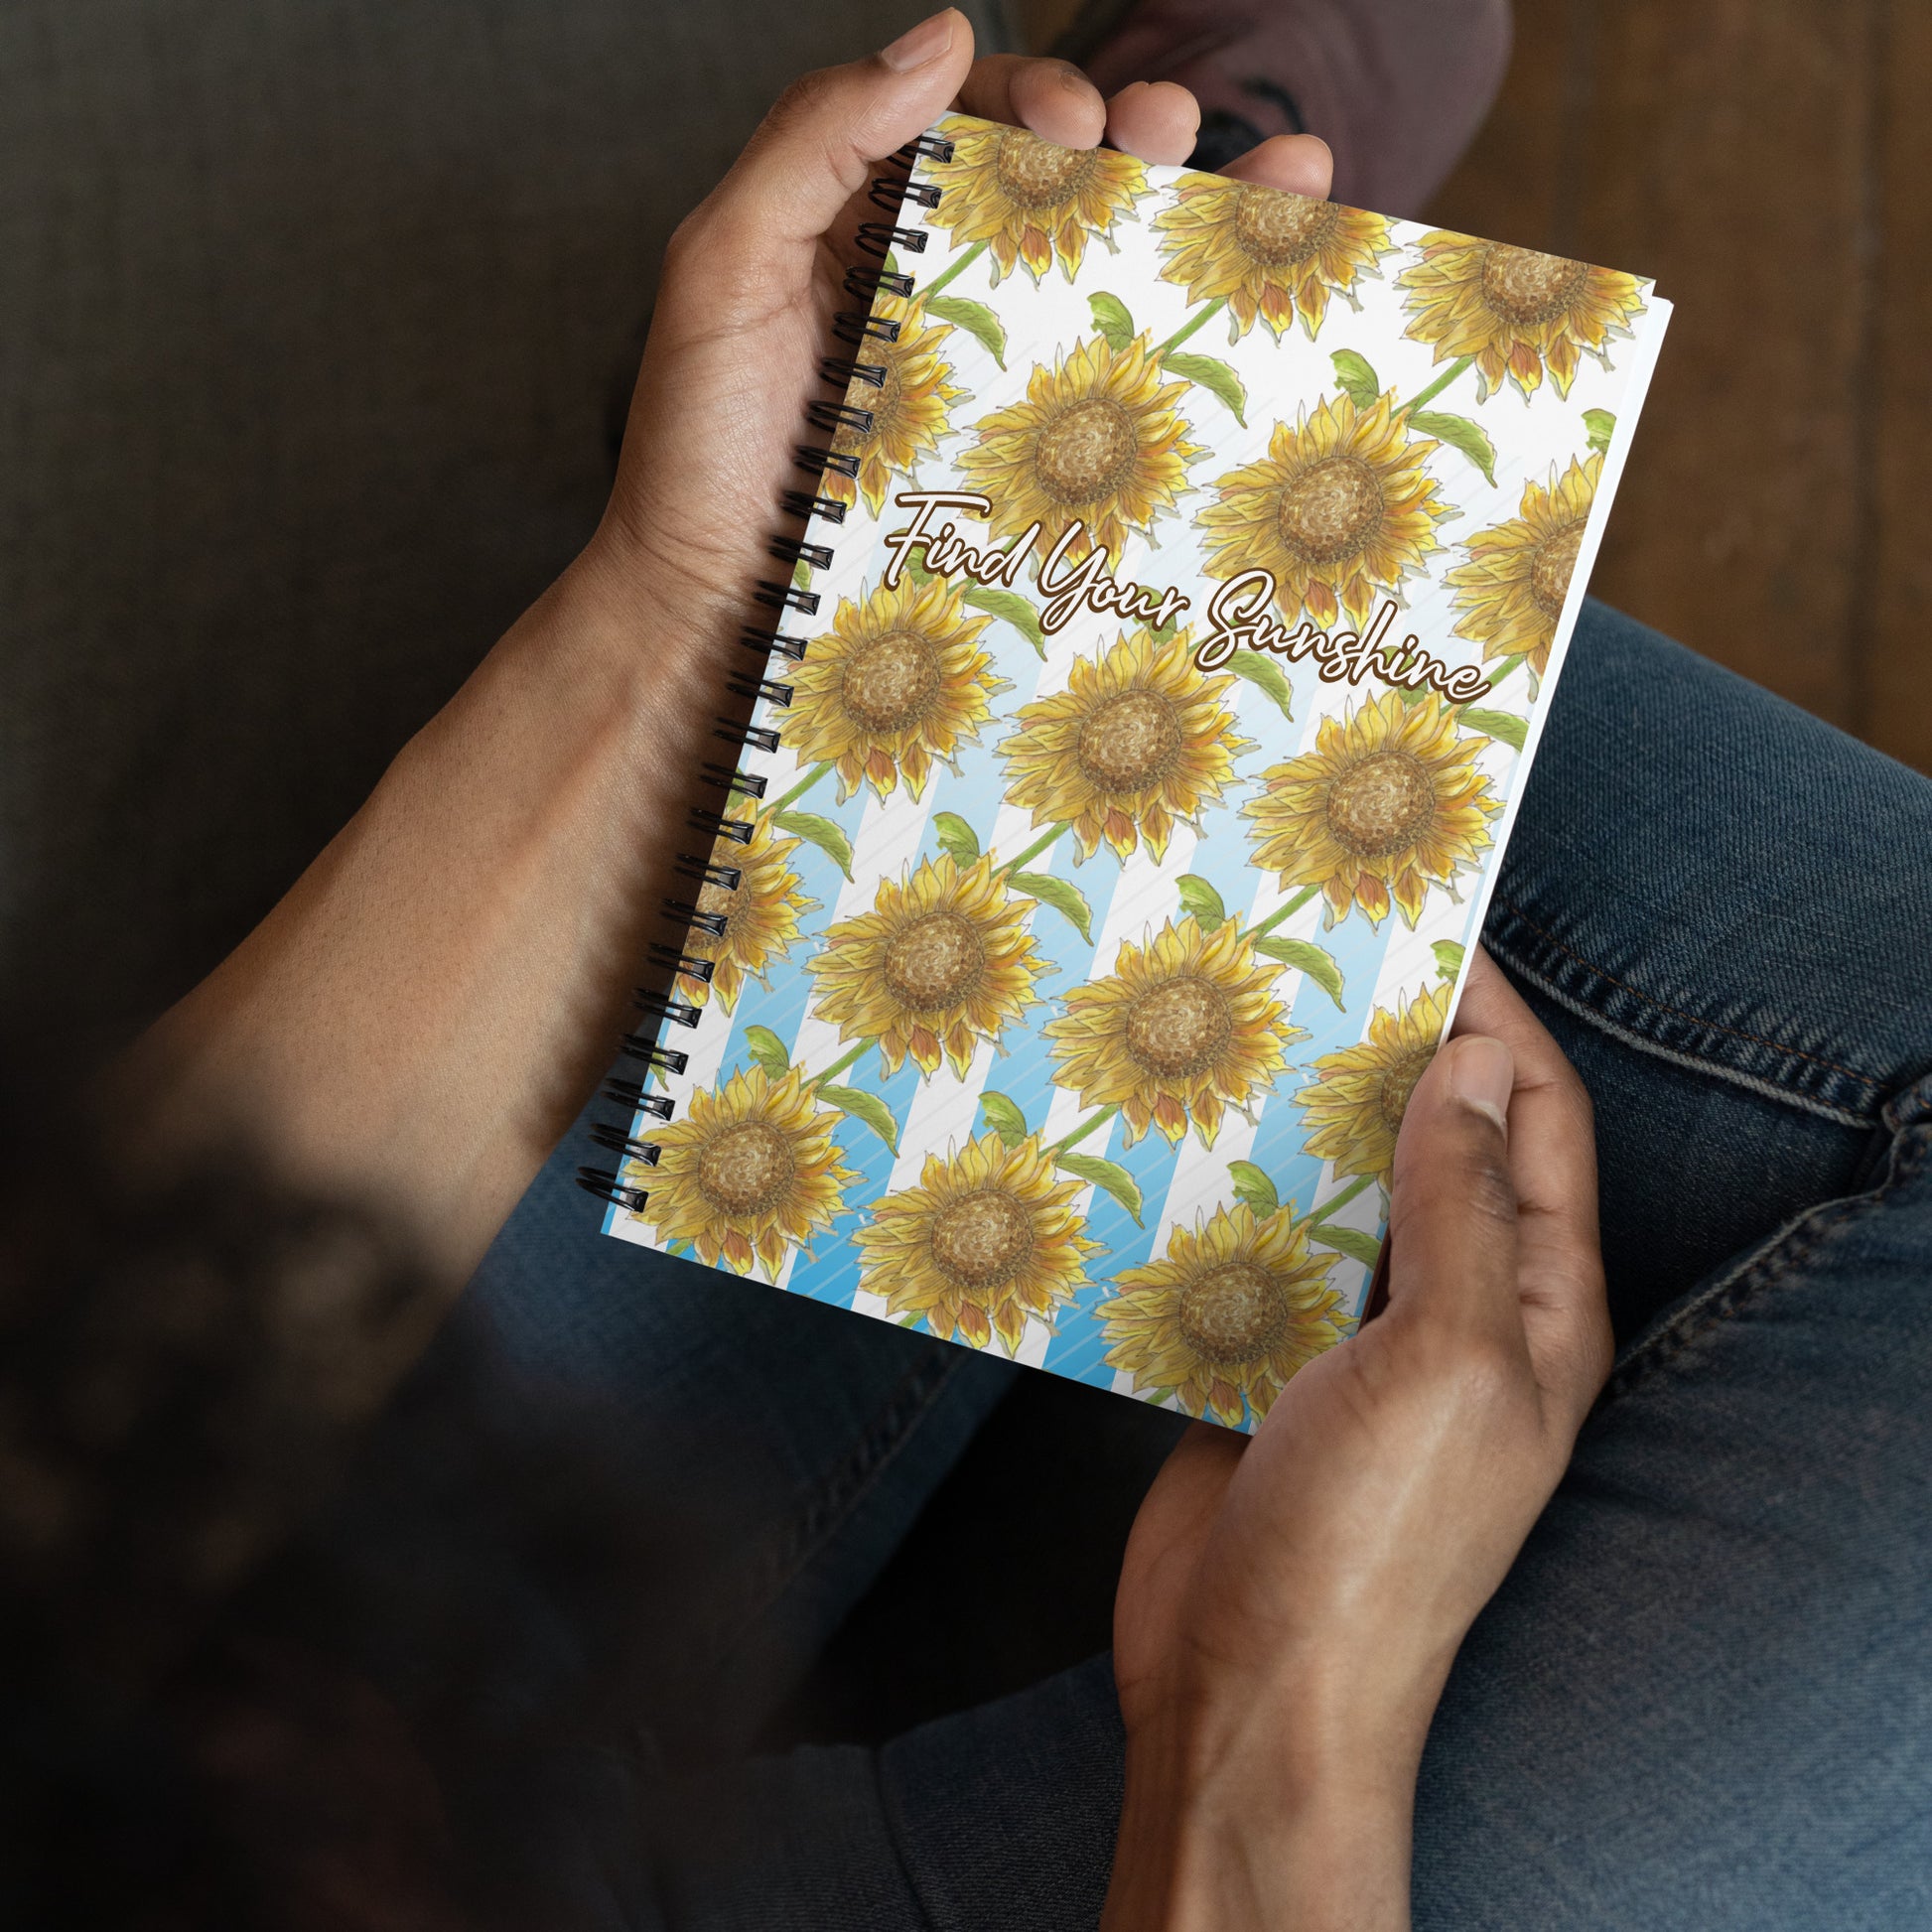 Spiral bound notebook with soft touch cover and 140 dotted pages. Cover features a pattern of watercolor sunflowers and blue and white stripes. Front has inspirational phrase "find your sunshine." Measures 5.5 inches by 8.5 inches. Shown in the hands of a model.